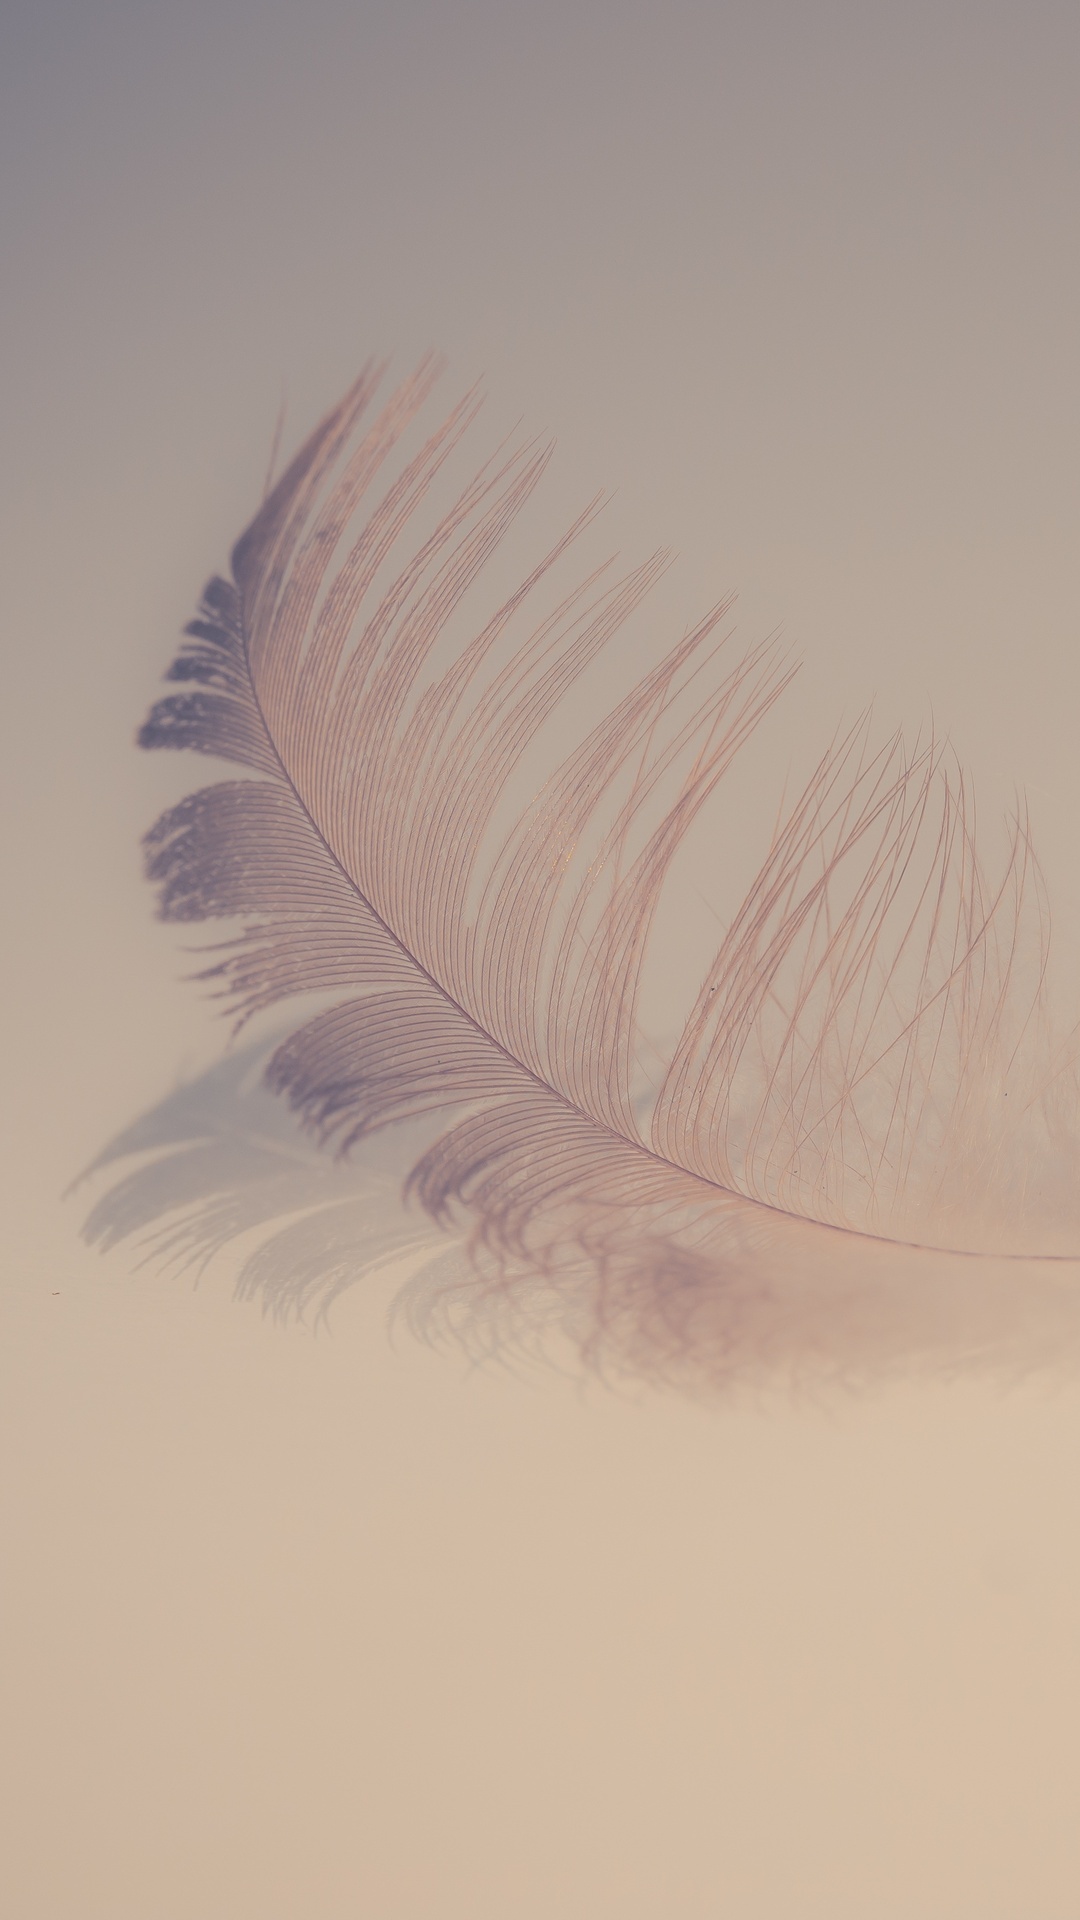 Feather: The rachis, The softer side branches known as barbs. 1080x1920 Full HD Wallpaper.